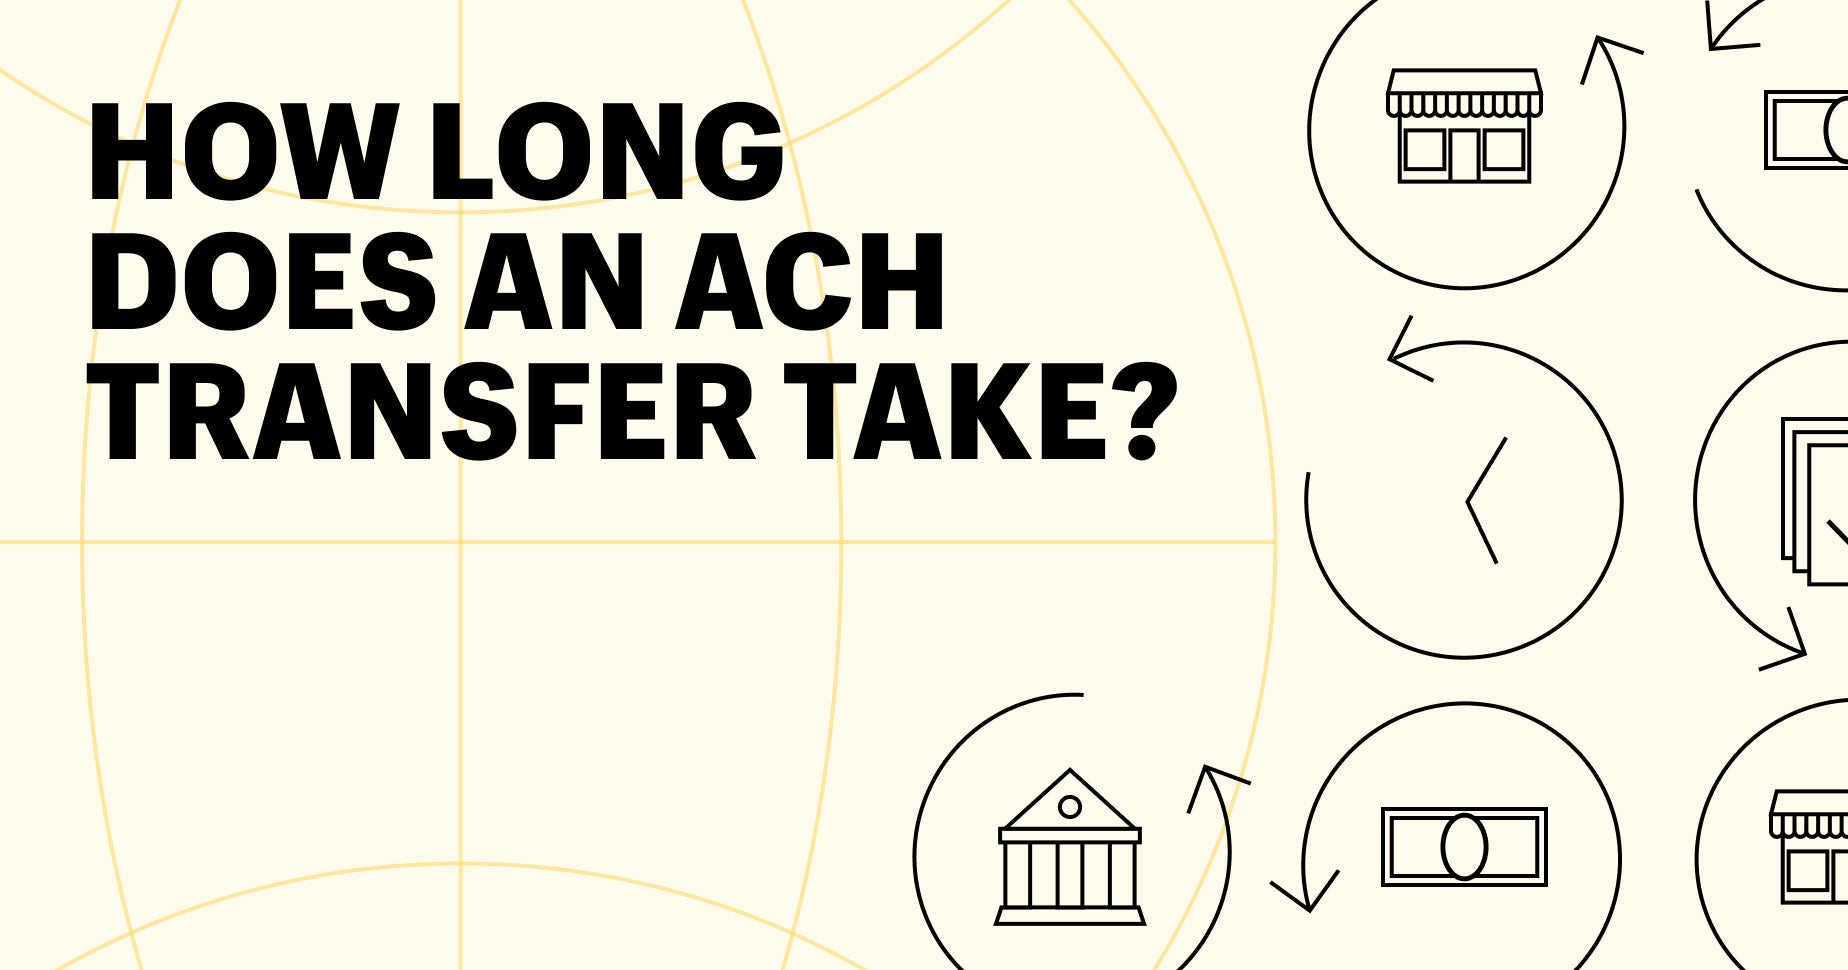 How long does an ACH transfer take?